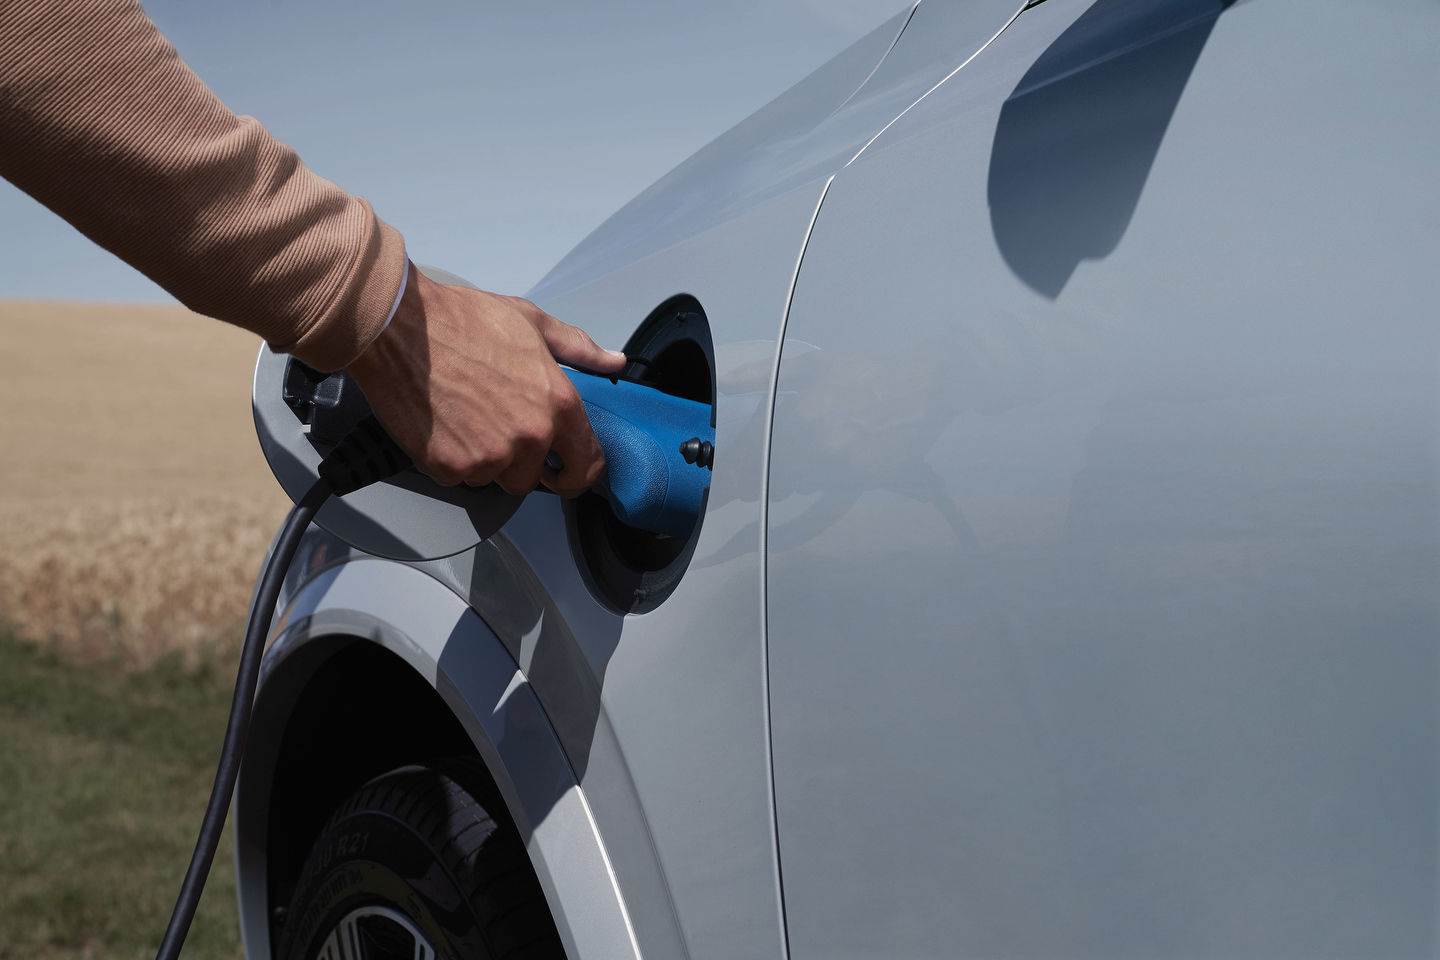 Hybrid vs Plug-in Hybrid vs Electric Vehicles: What are the differences?